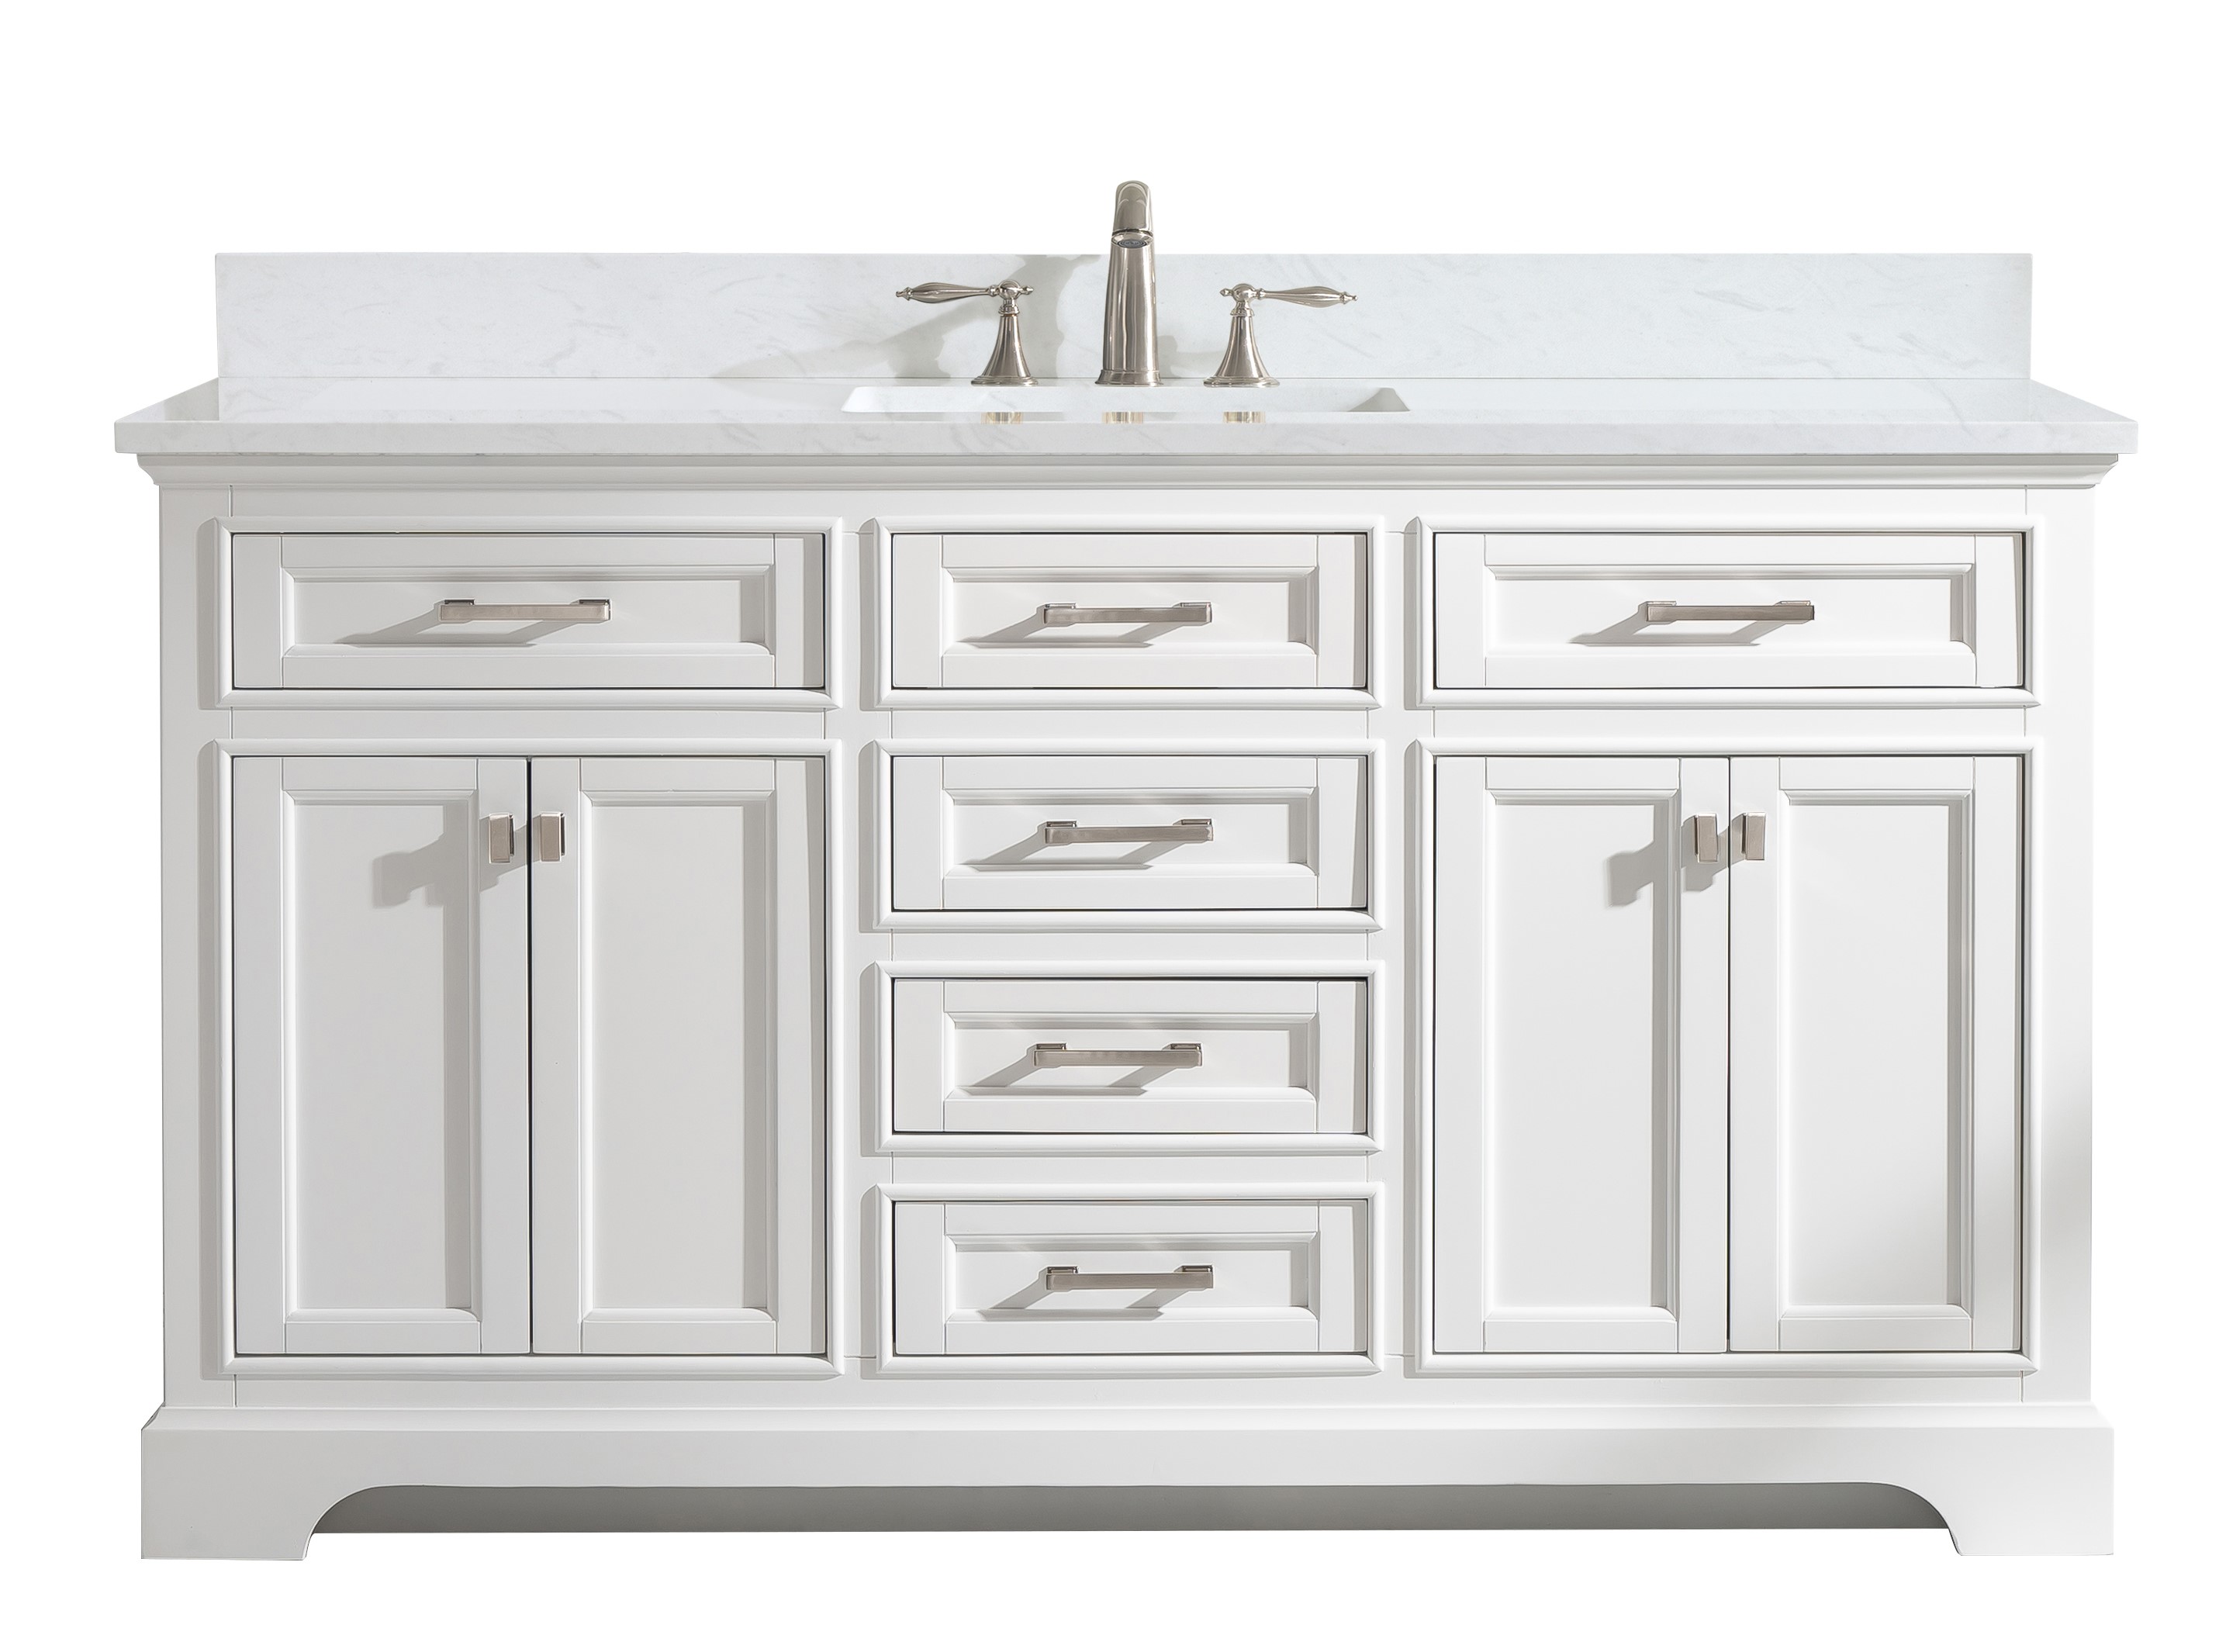 60" Single Vanity in White Finish with 1" Thick White Quartz Countertop in White Finish